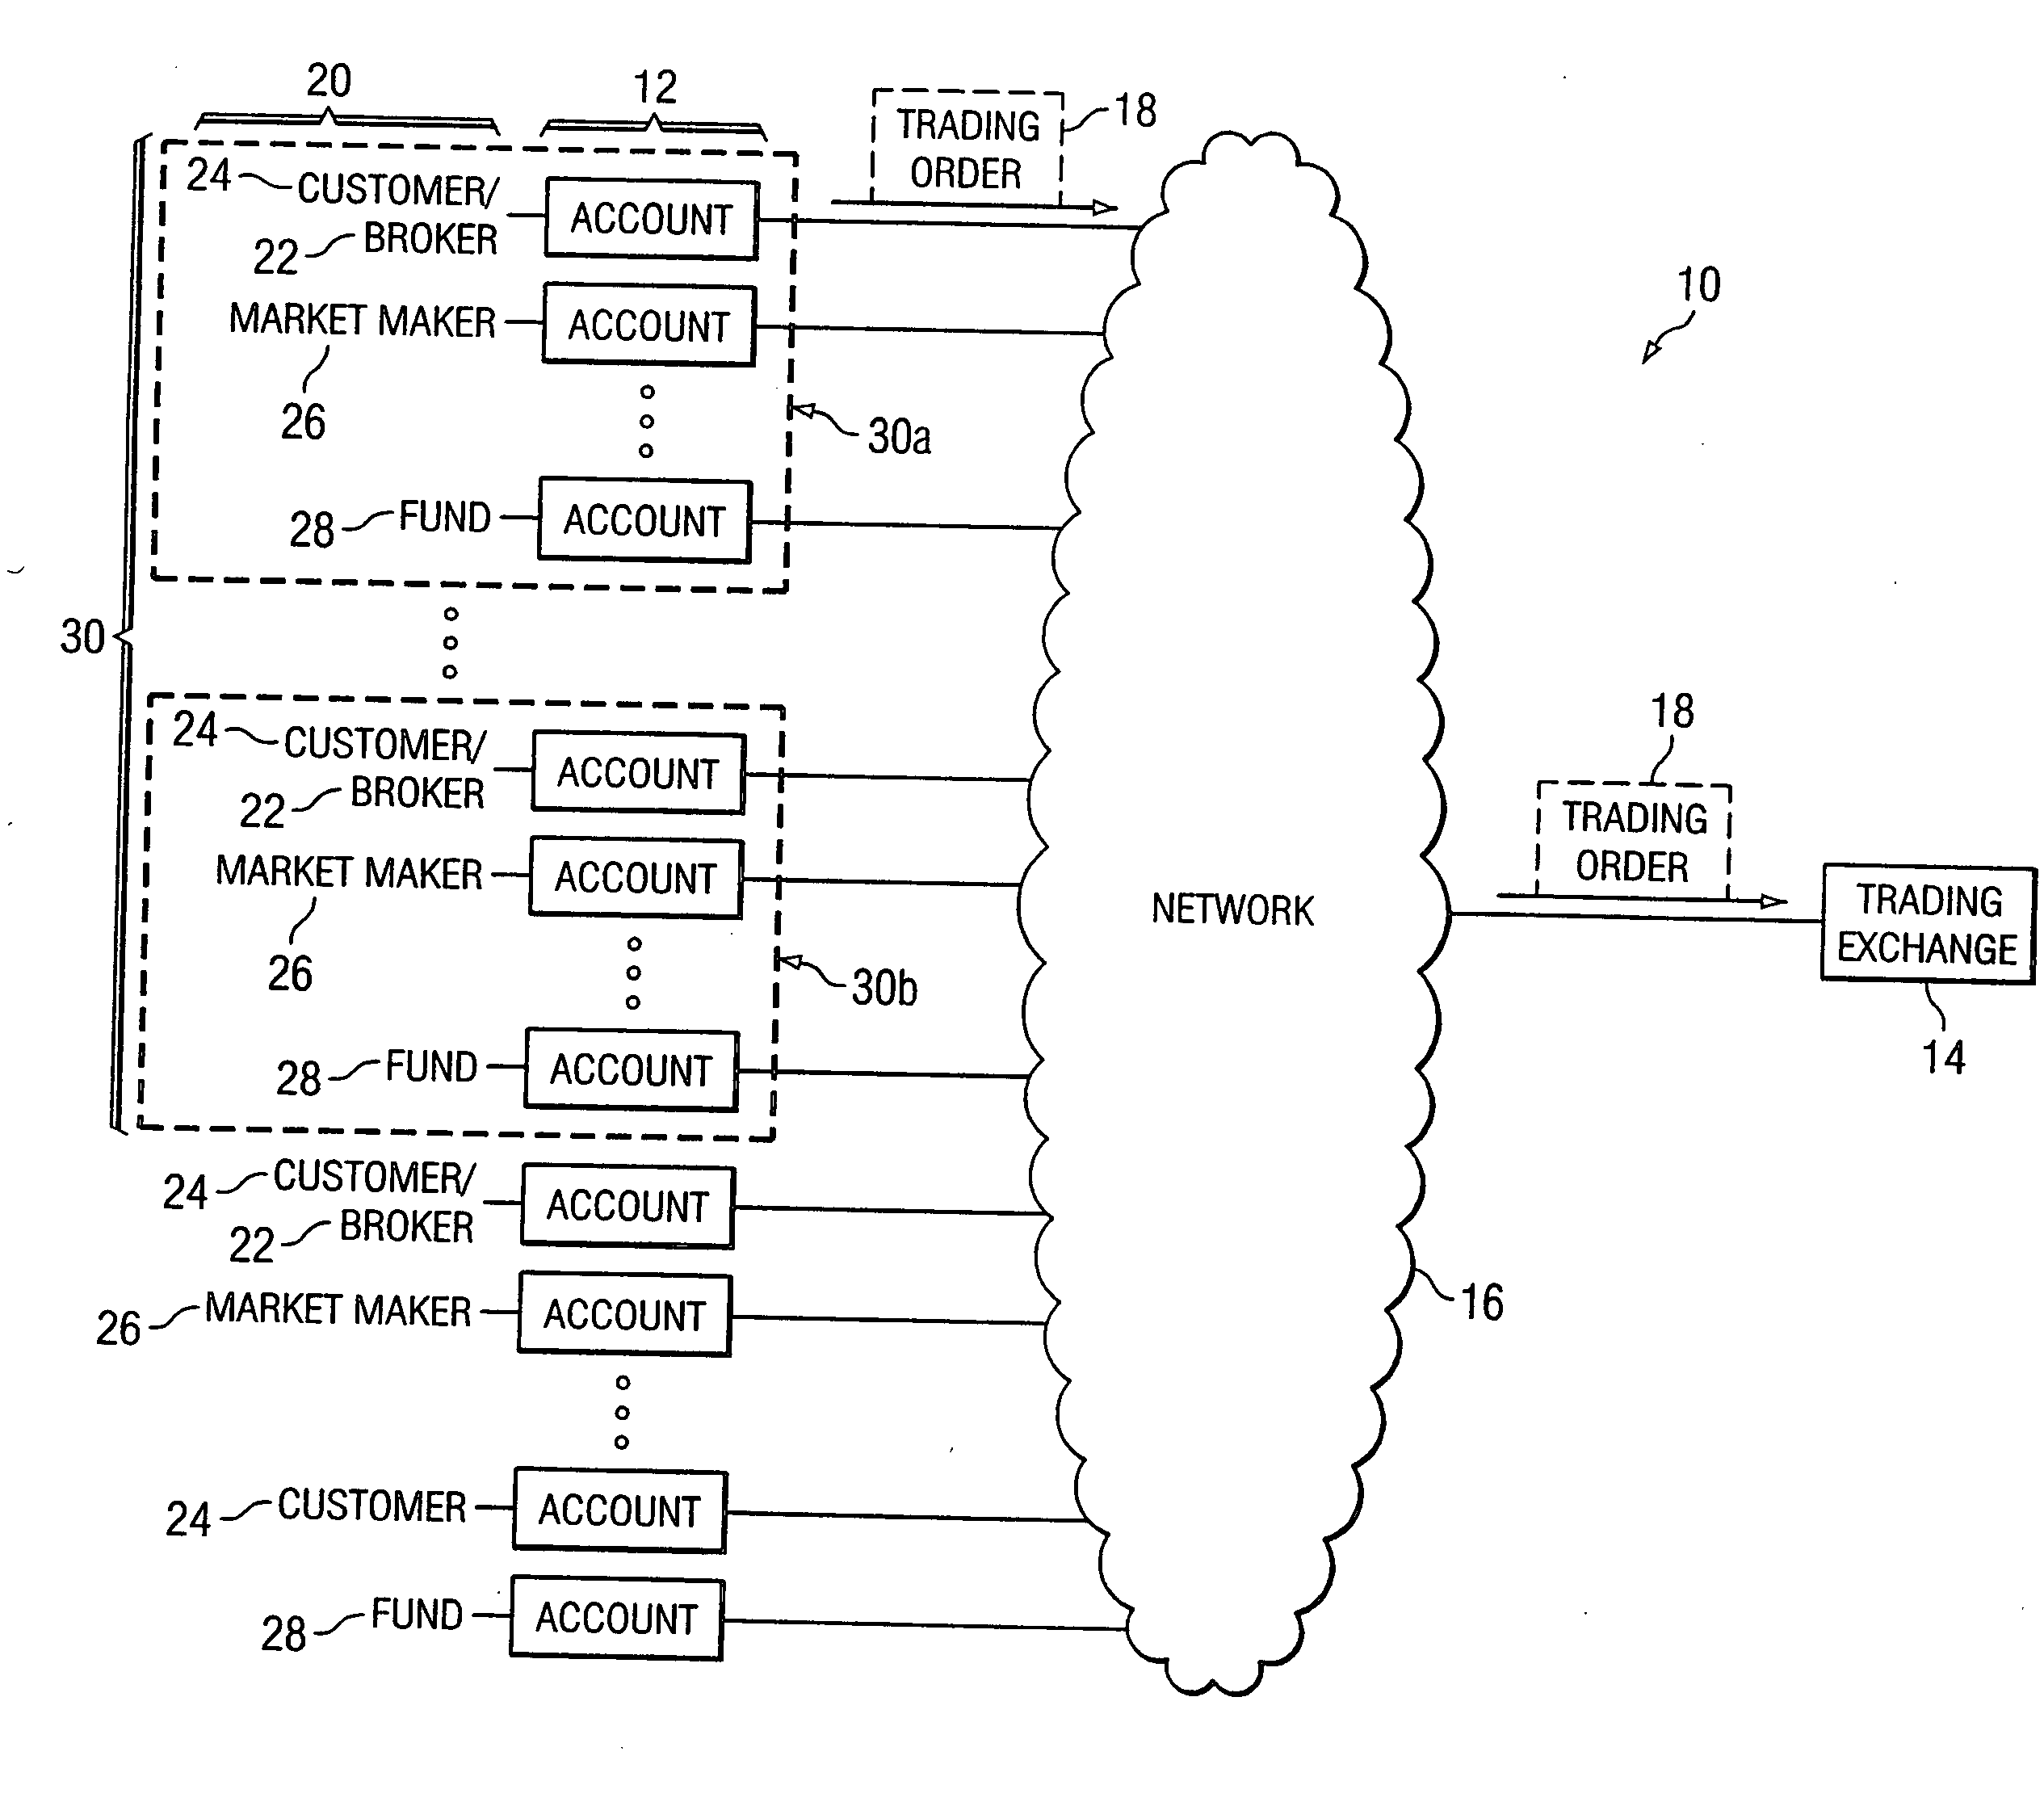 System and method for managing trading between related entities